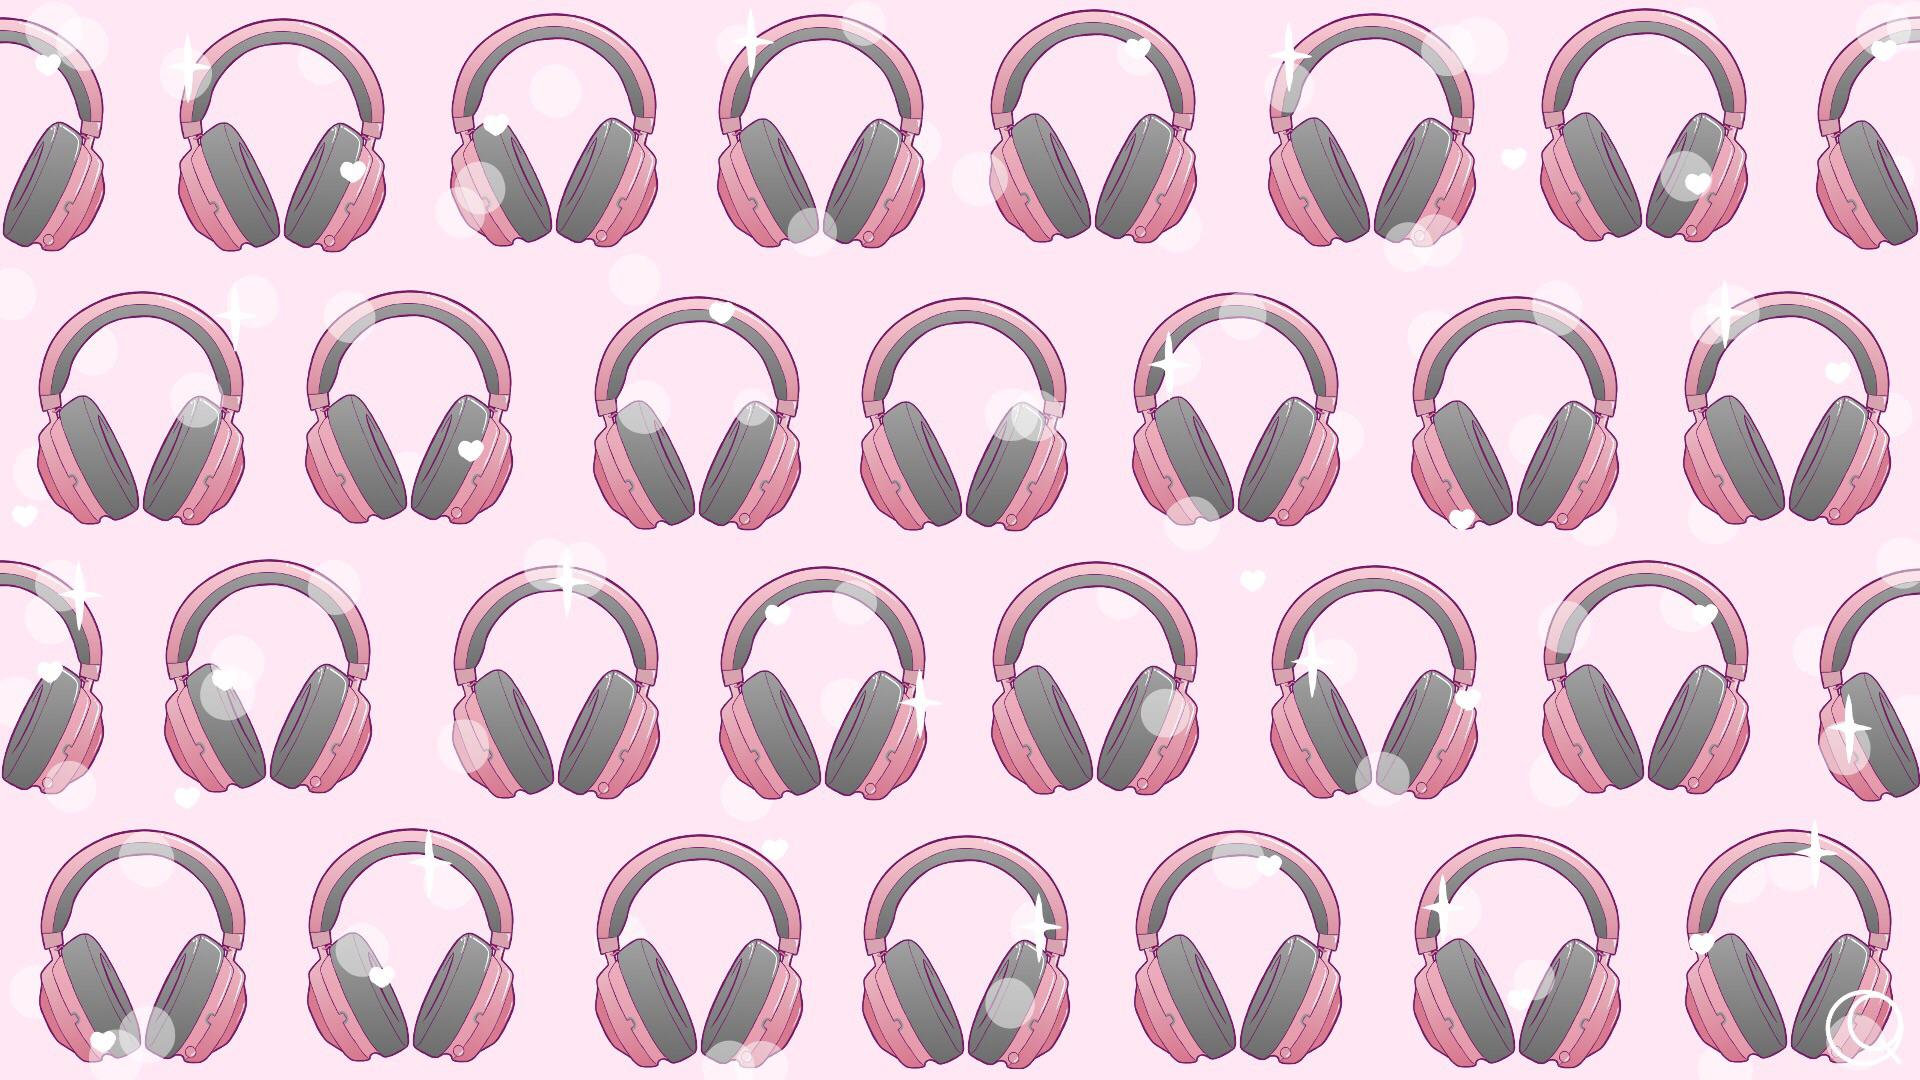 Razer Kraken Pink Quartz Wallpaper (1910x1080) by Qamar_Alnz thought it would be nice to share this to all of you guys because I made it for my PC